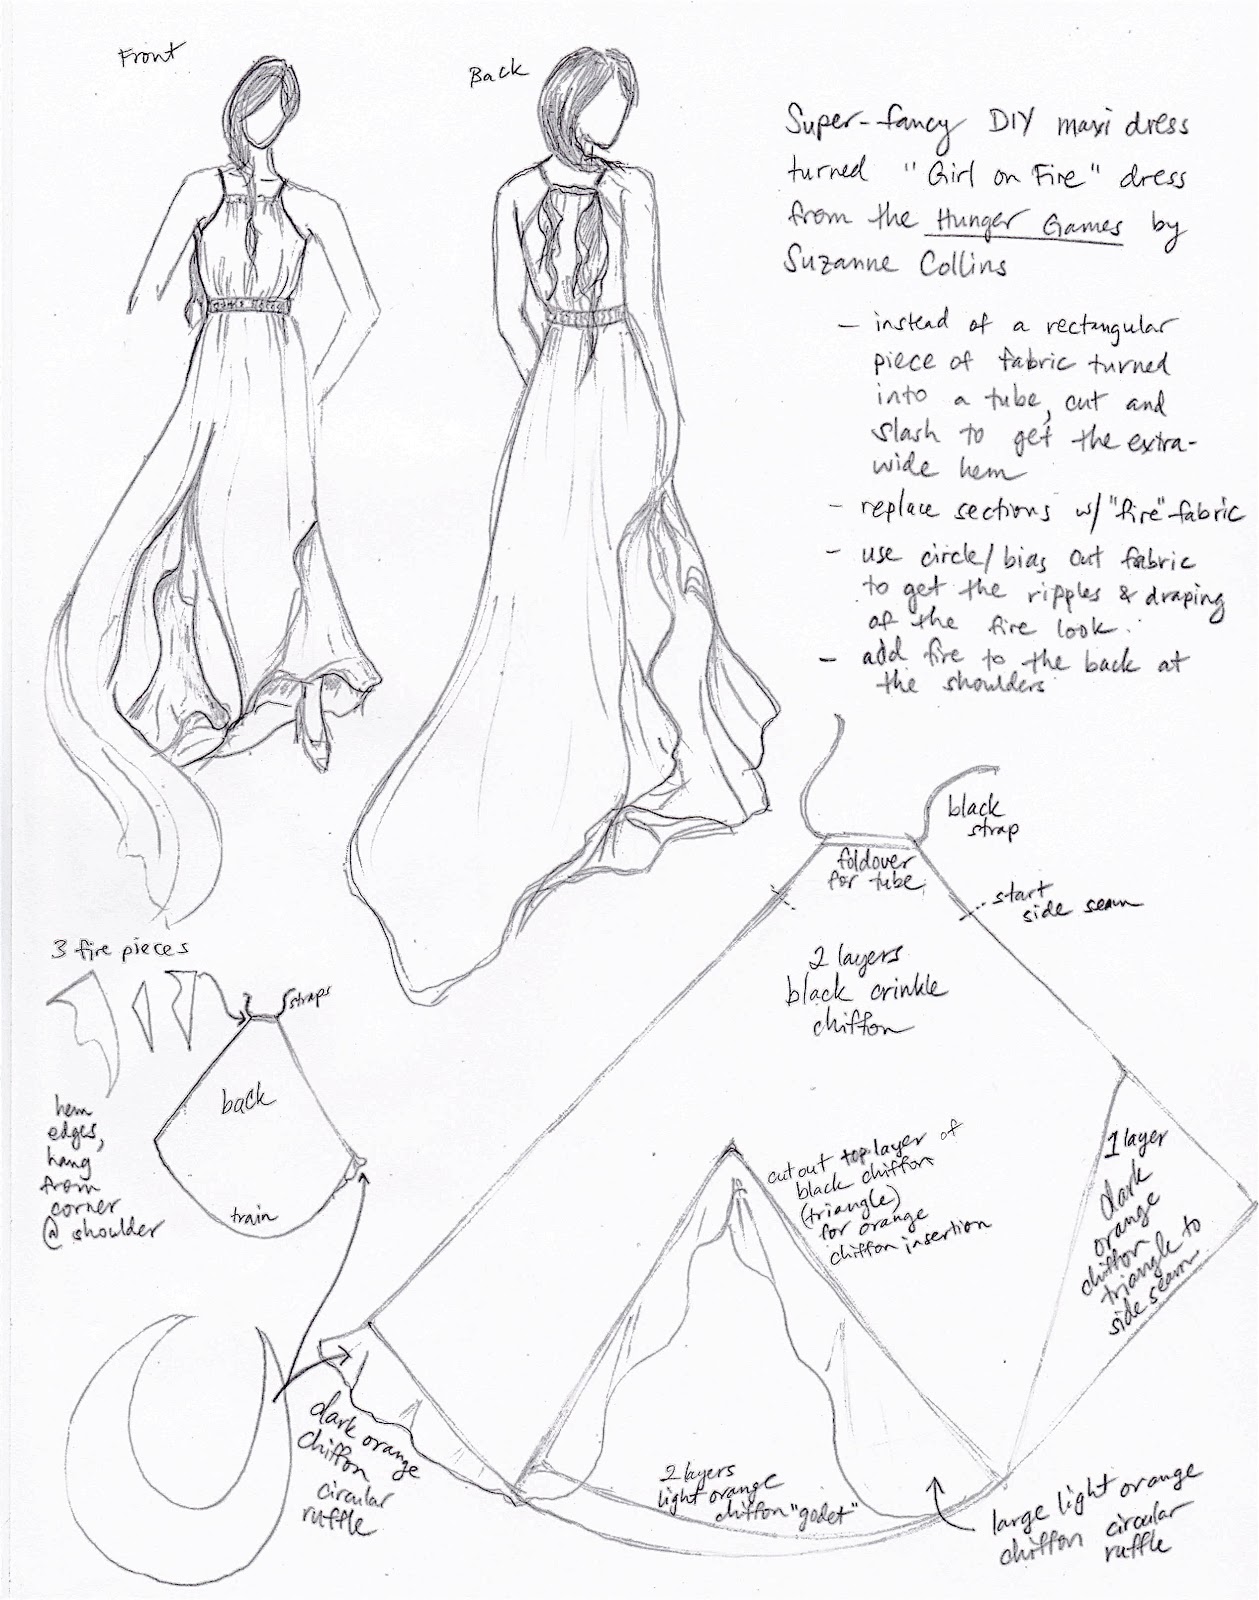 mermaid wedding dresses My sketches and breakdown of parts for the girl on fire dress